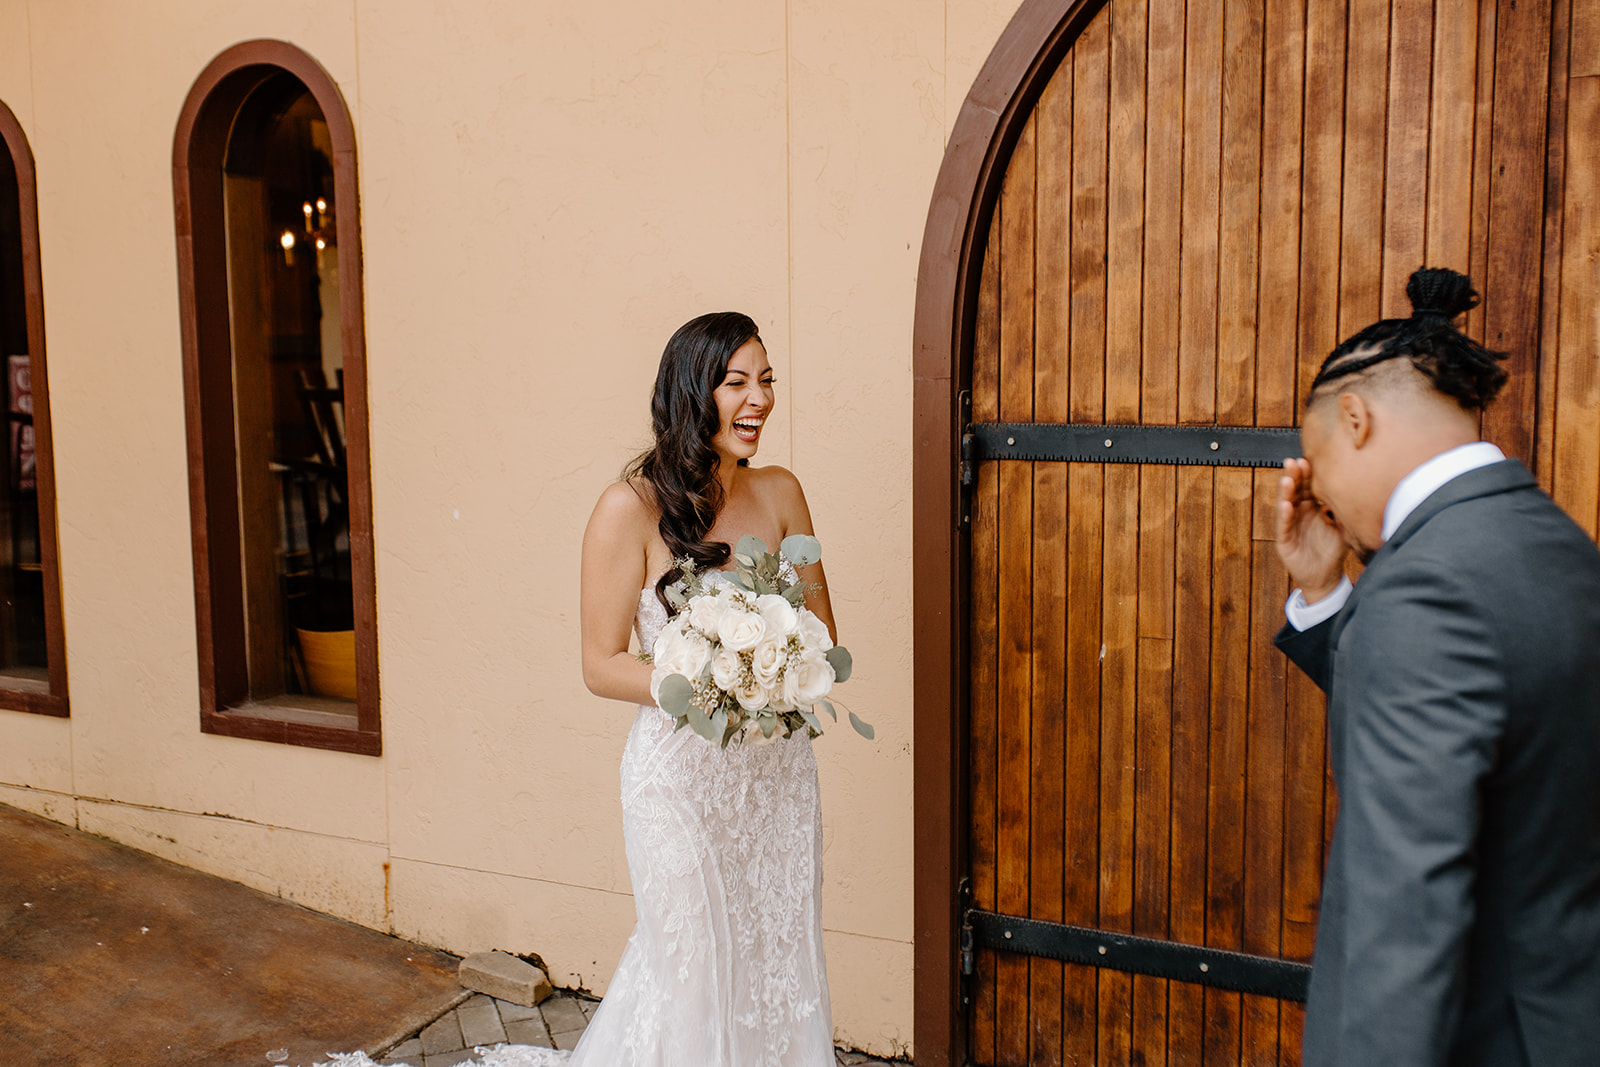 This couple had their first look in front of a winery, to say the least it was very emotional.